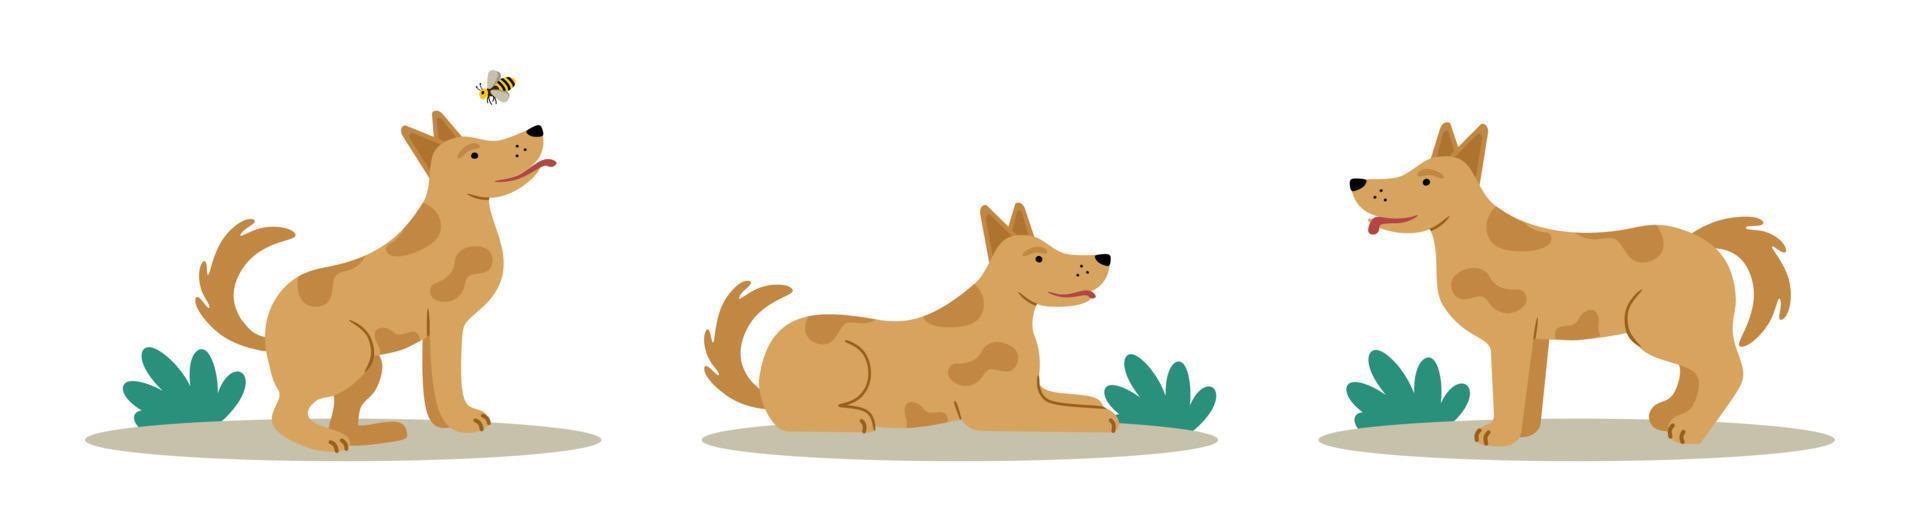 The dog is a cute cheerful pet in different poses. Editable vector illustration